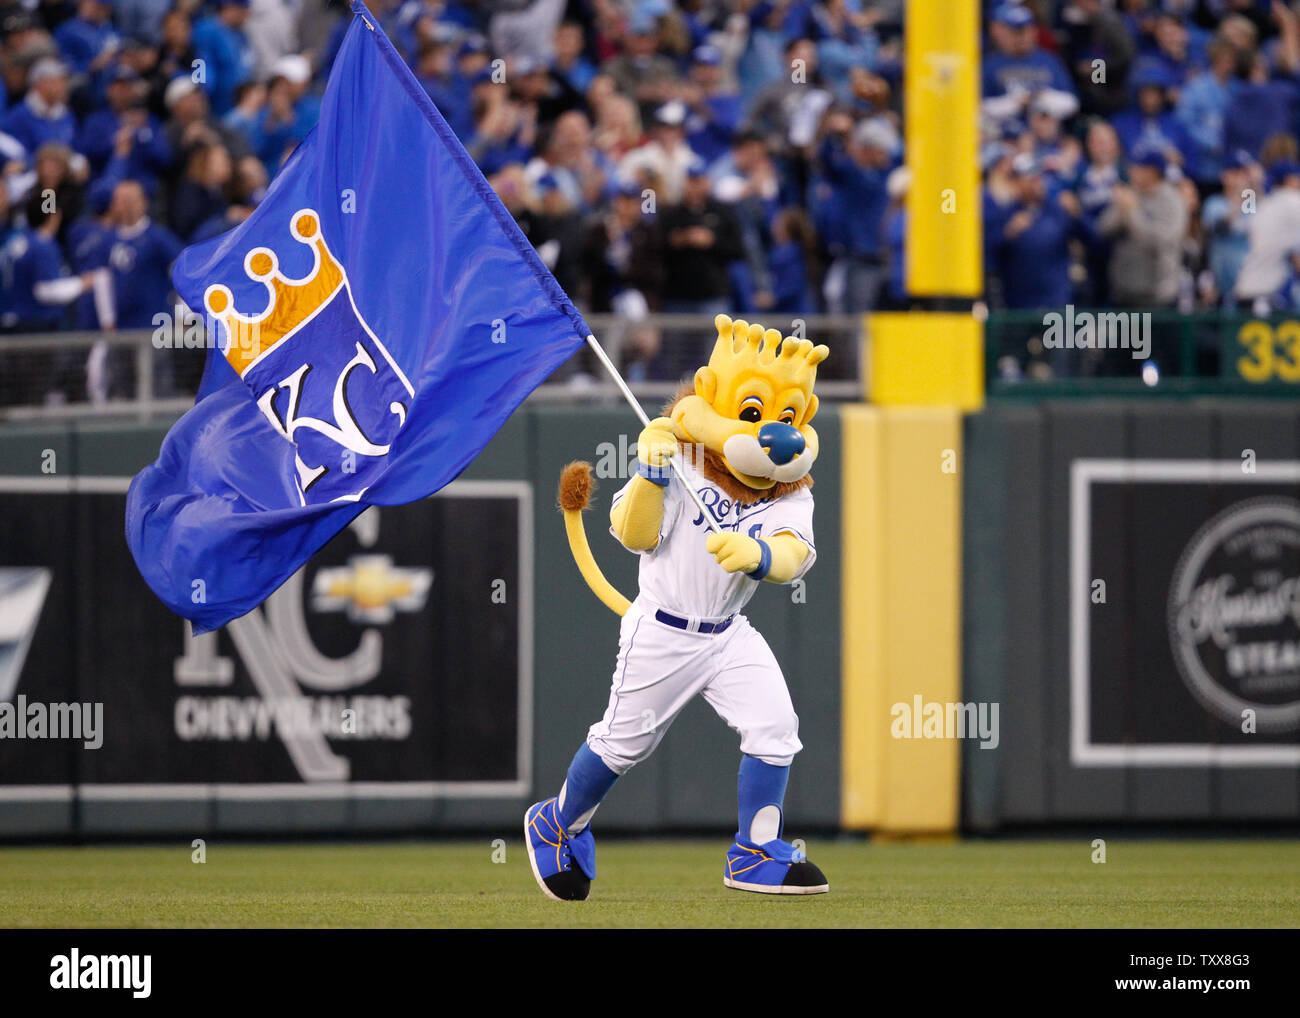 Kansas City Royals mascot Sluggerrr fires up the crowd before Game 2 of the  ALCS against the Toronto Blue Jays on at Kauffman Stadium in Kansas City,  Mo., on Saturday, Oct. 17